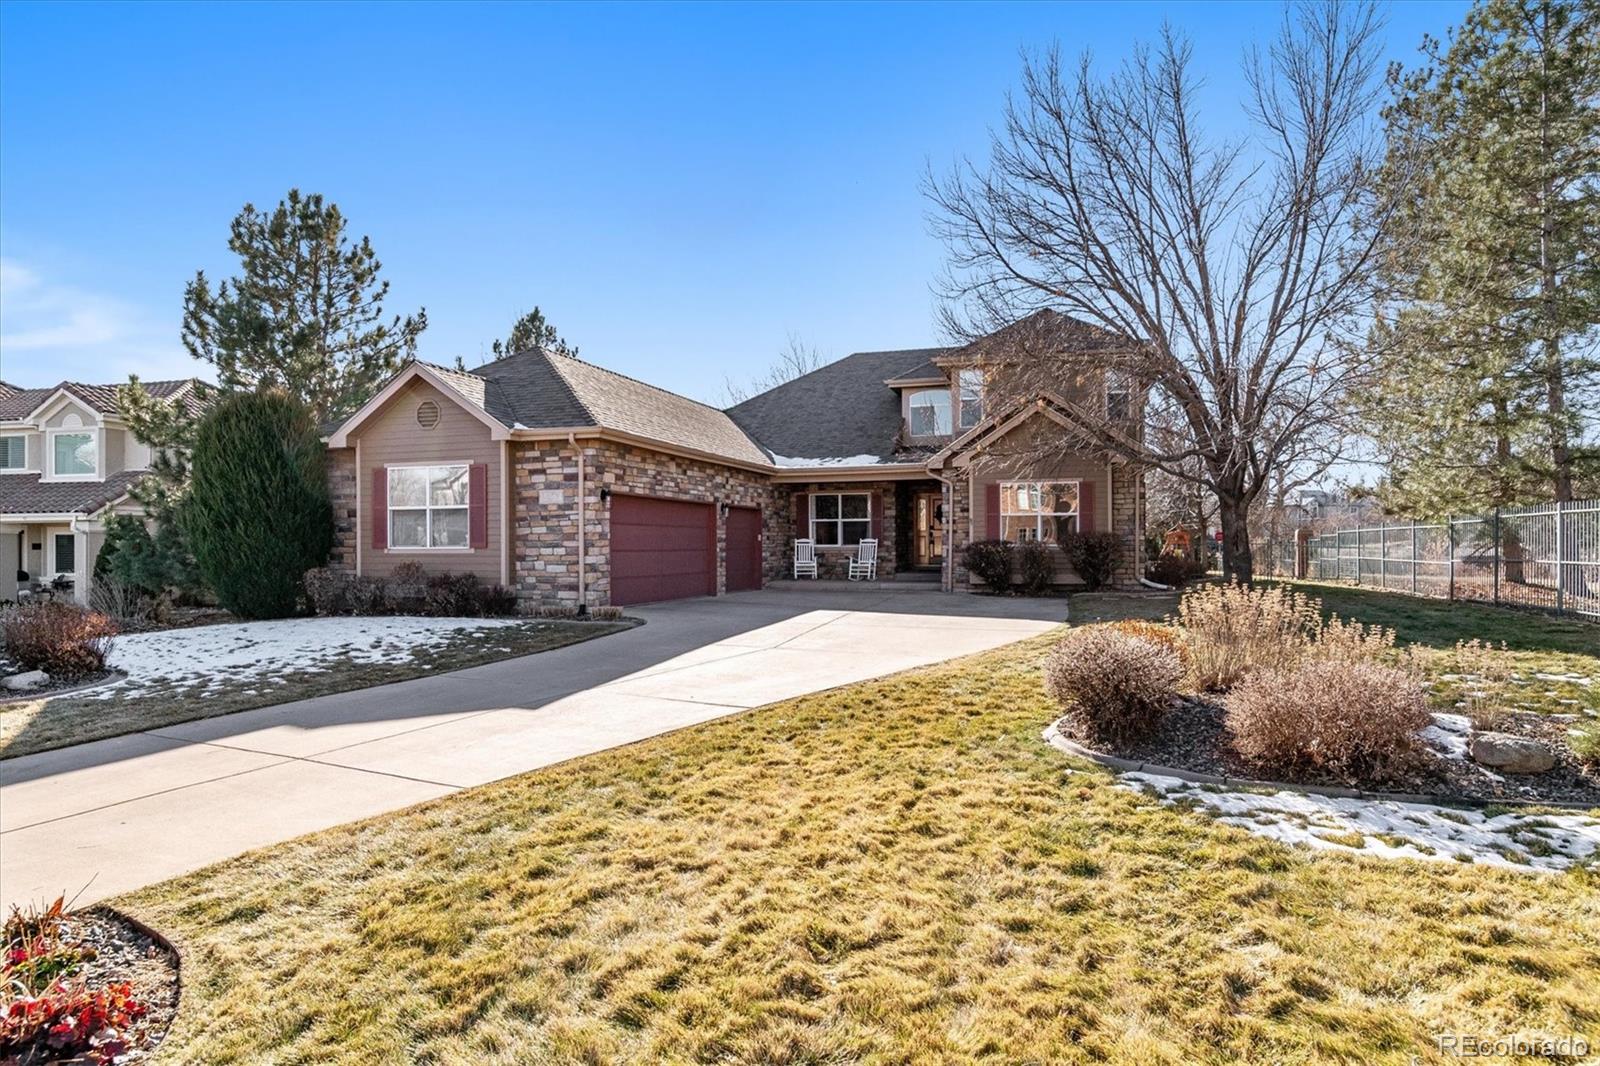 Report Image for 15964 W 67th Place,Arvada, Colorado